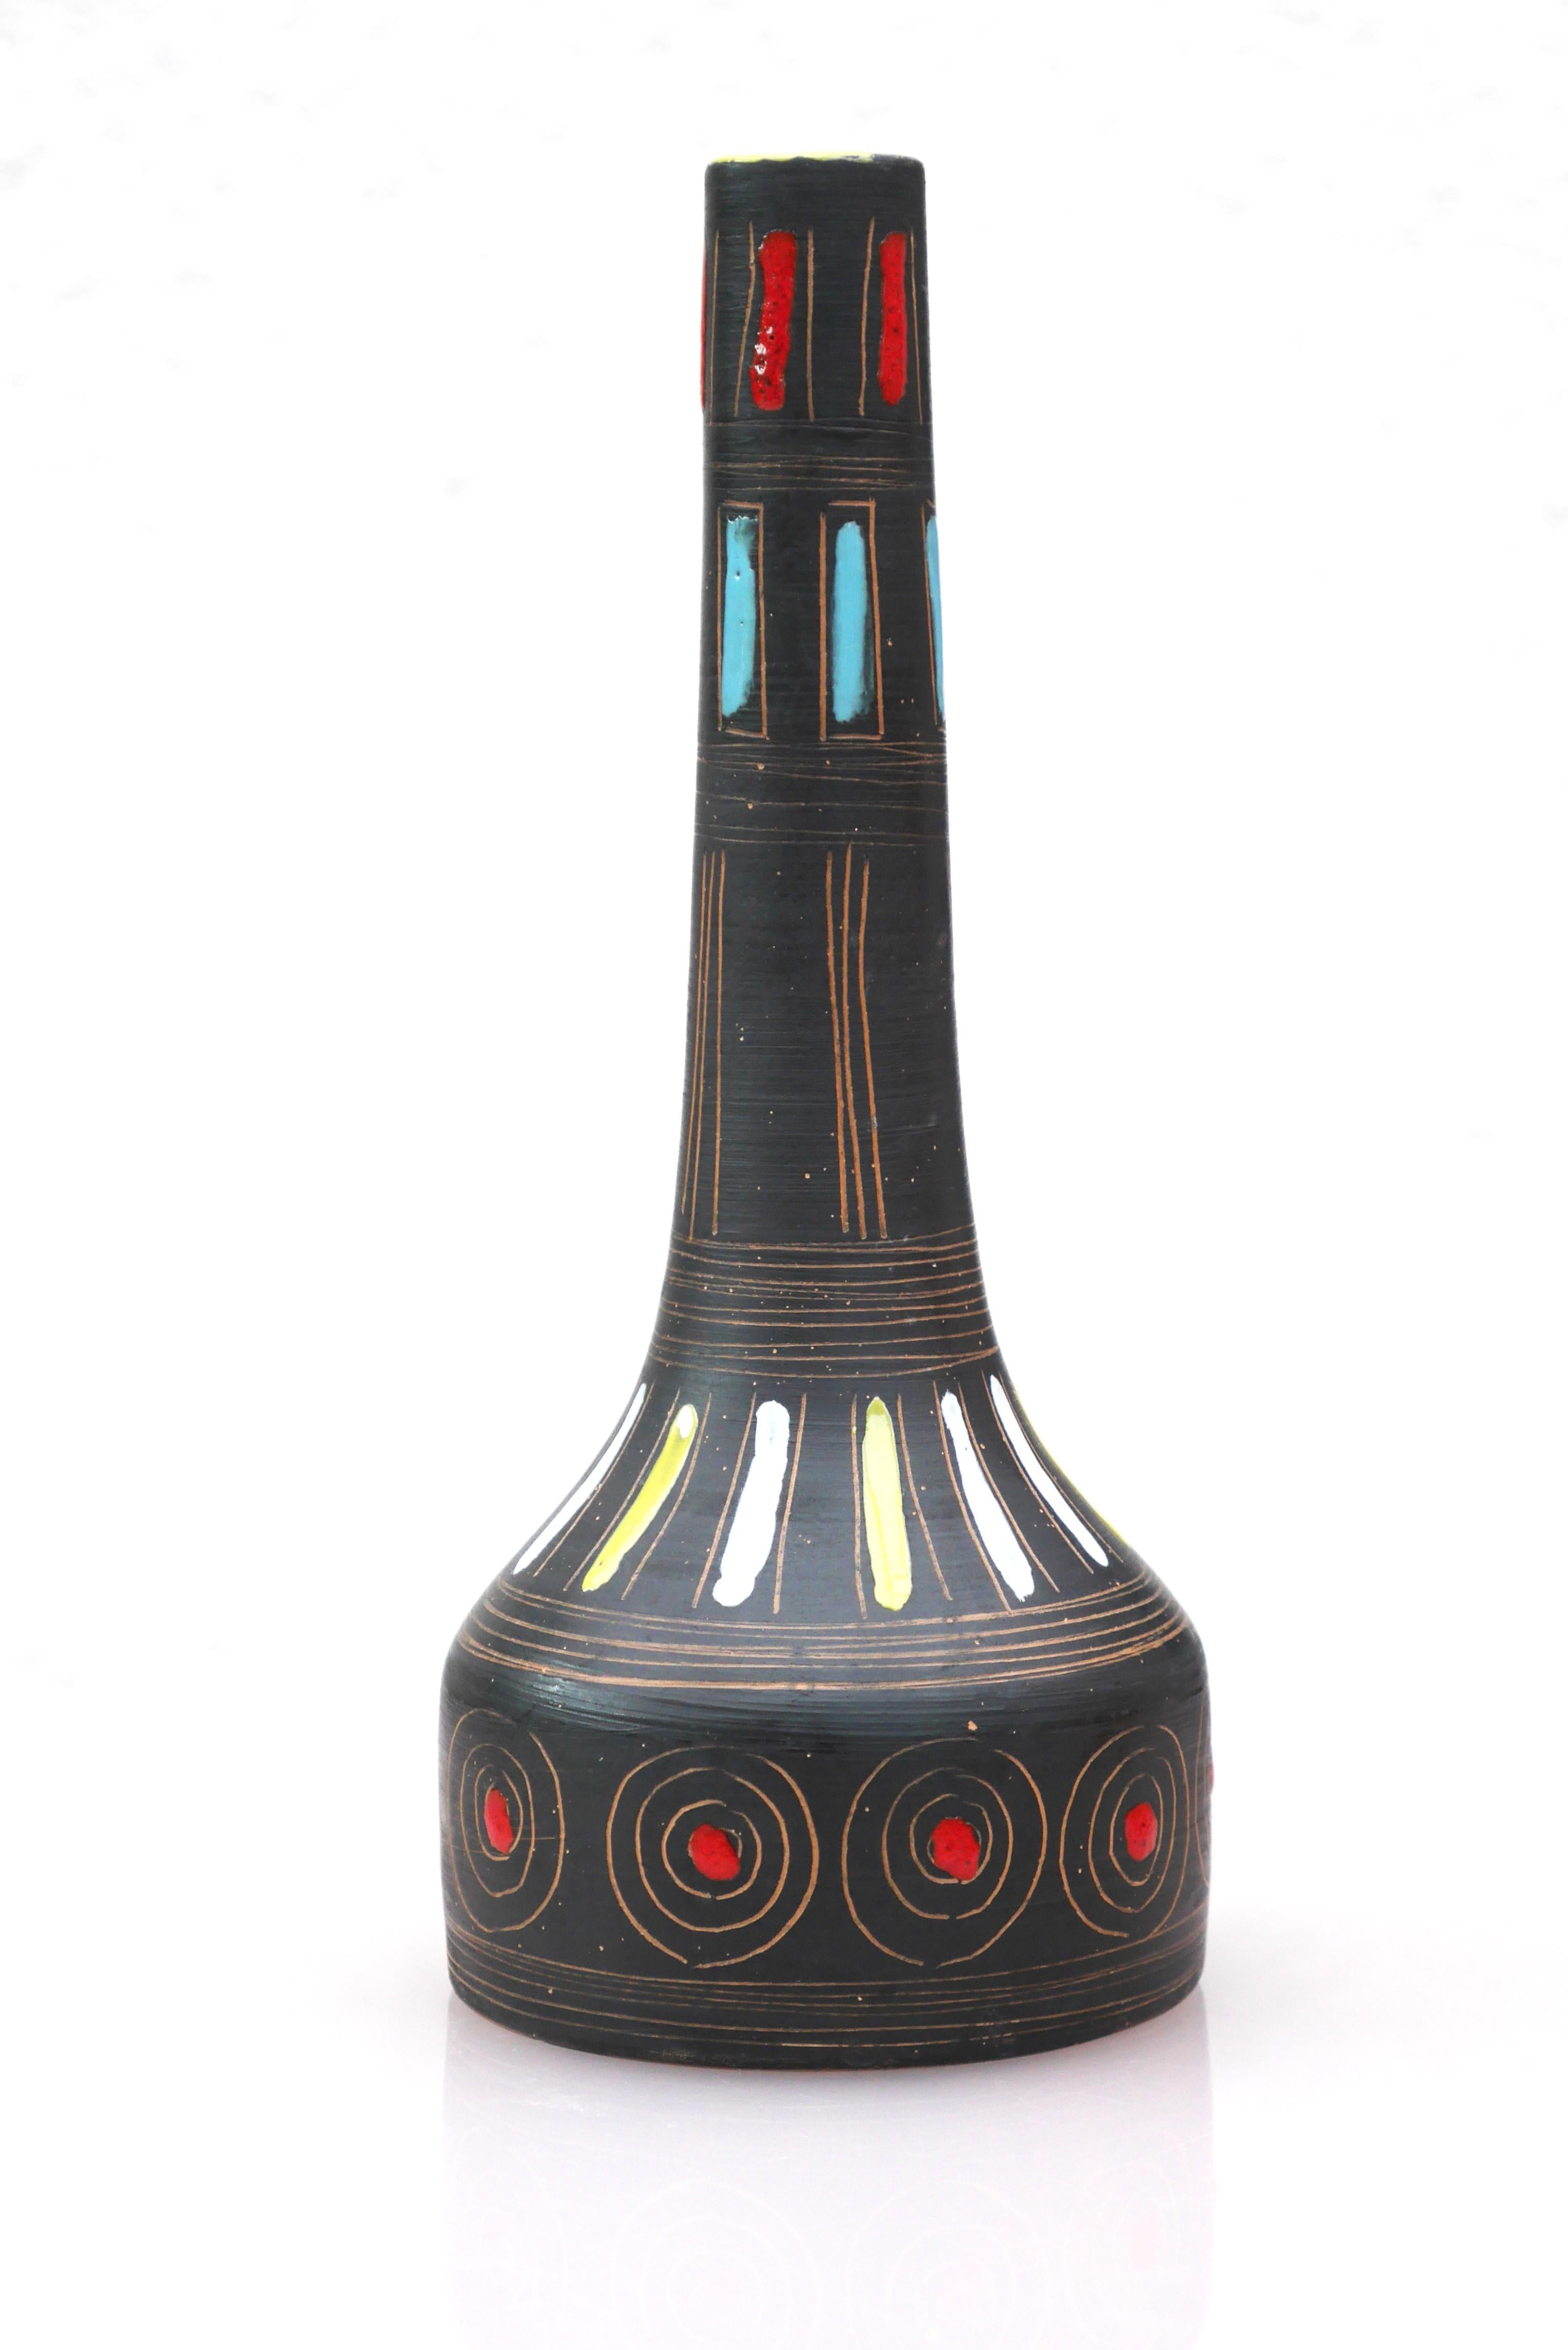 Late 20th Century A pair of Mid-century modern pottery vases, by Fratelli Fanciullacci , Italy.